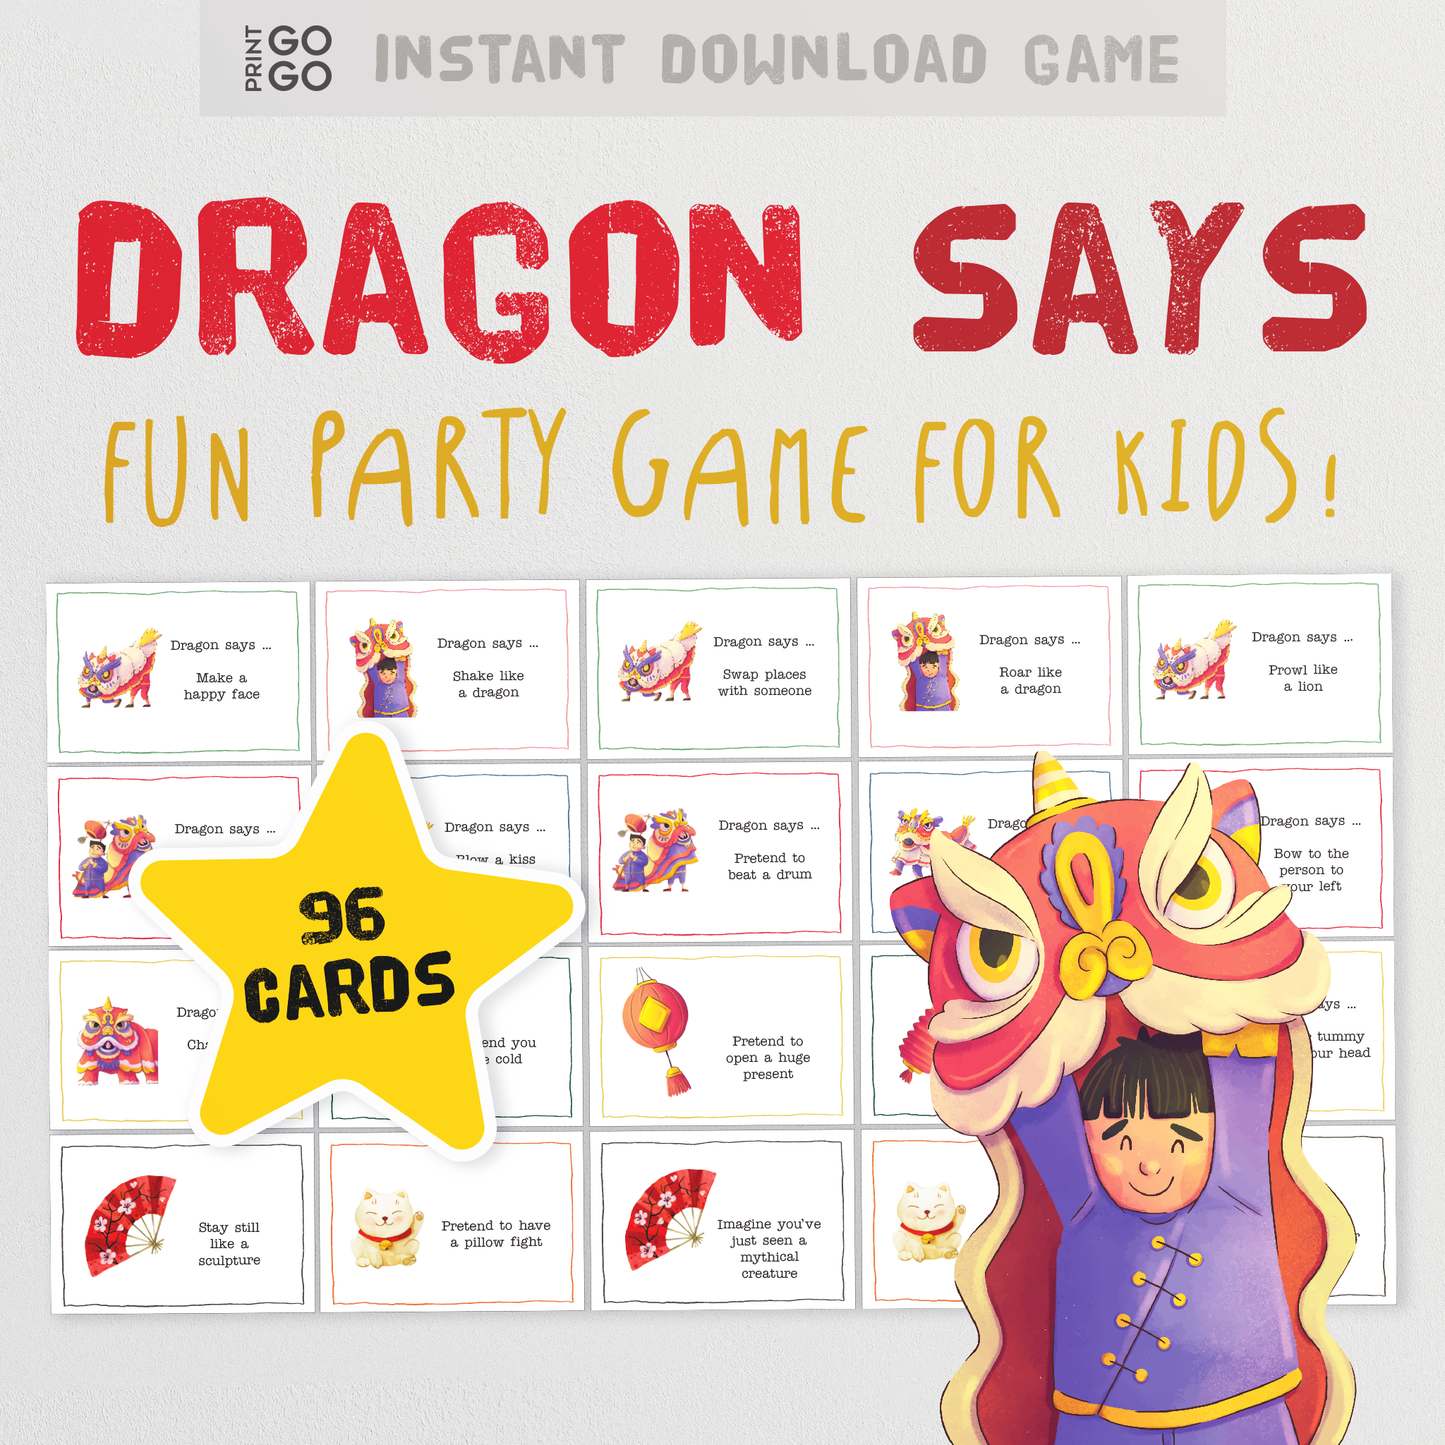 Dragon Says - The Fun Chinese New Year Party Game for Kids!